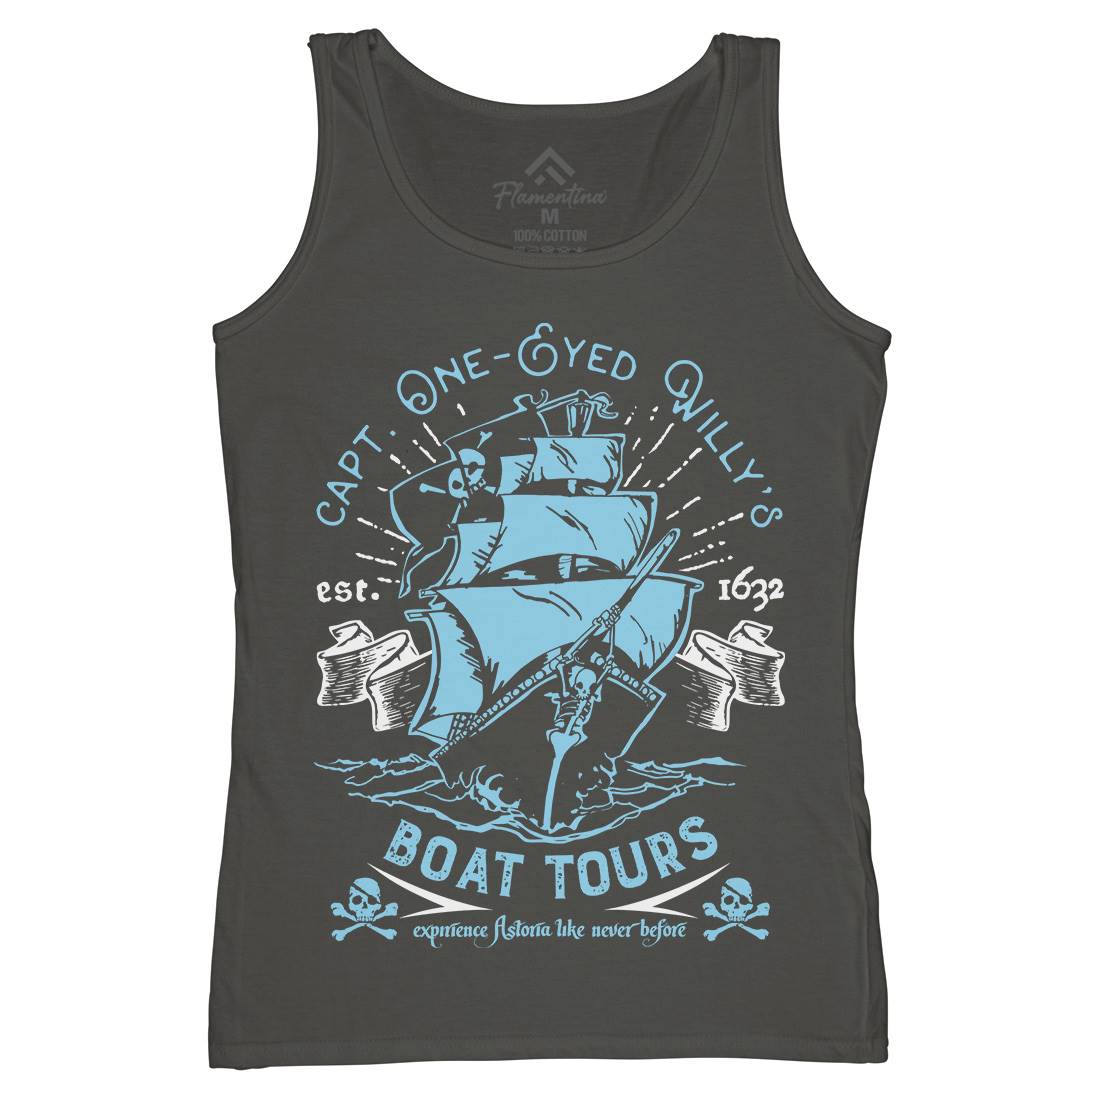 One-Eyed Willys Boat Tours Womens Organic Tank Top Vest Horror D160